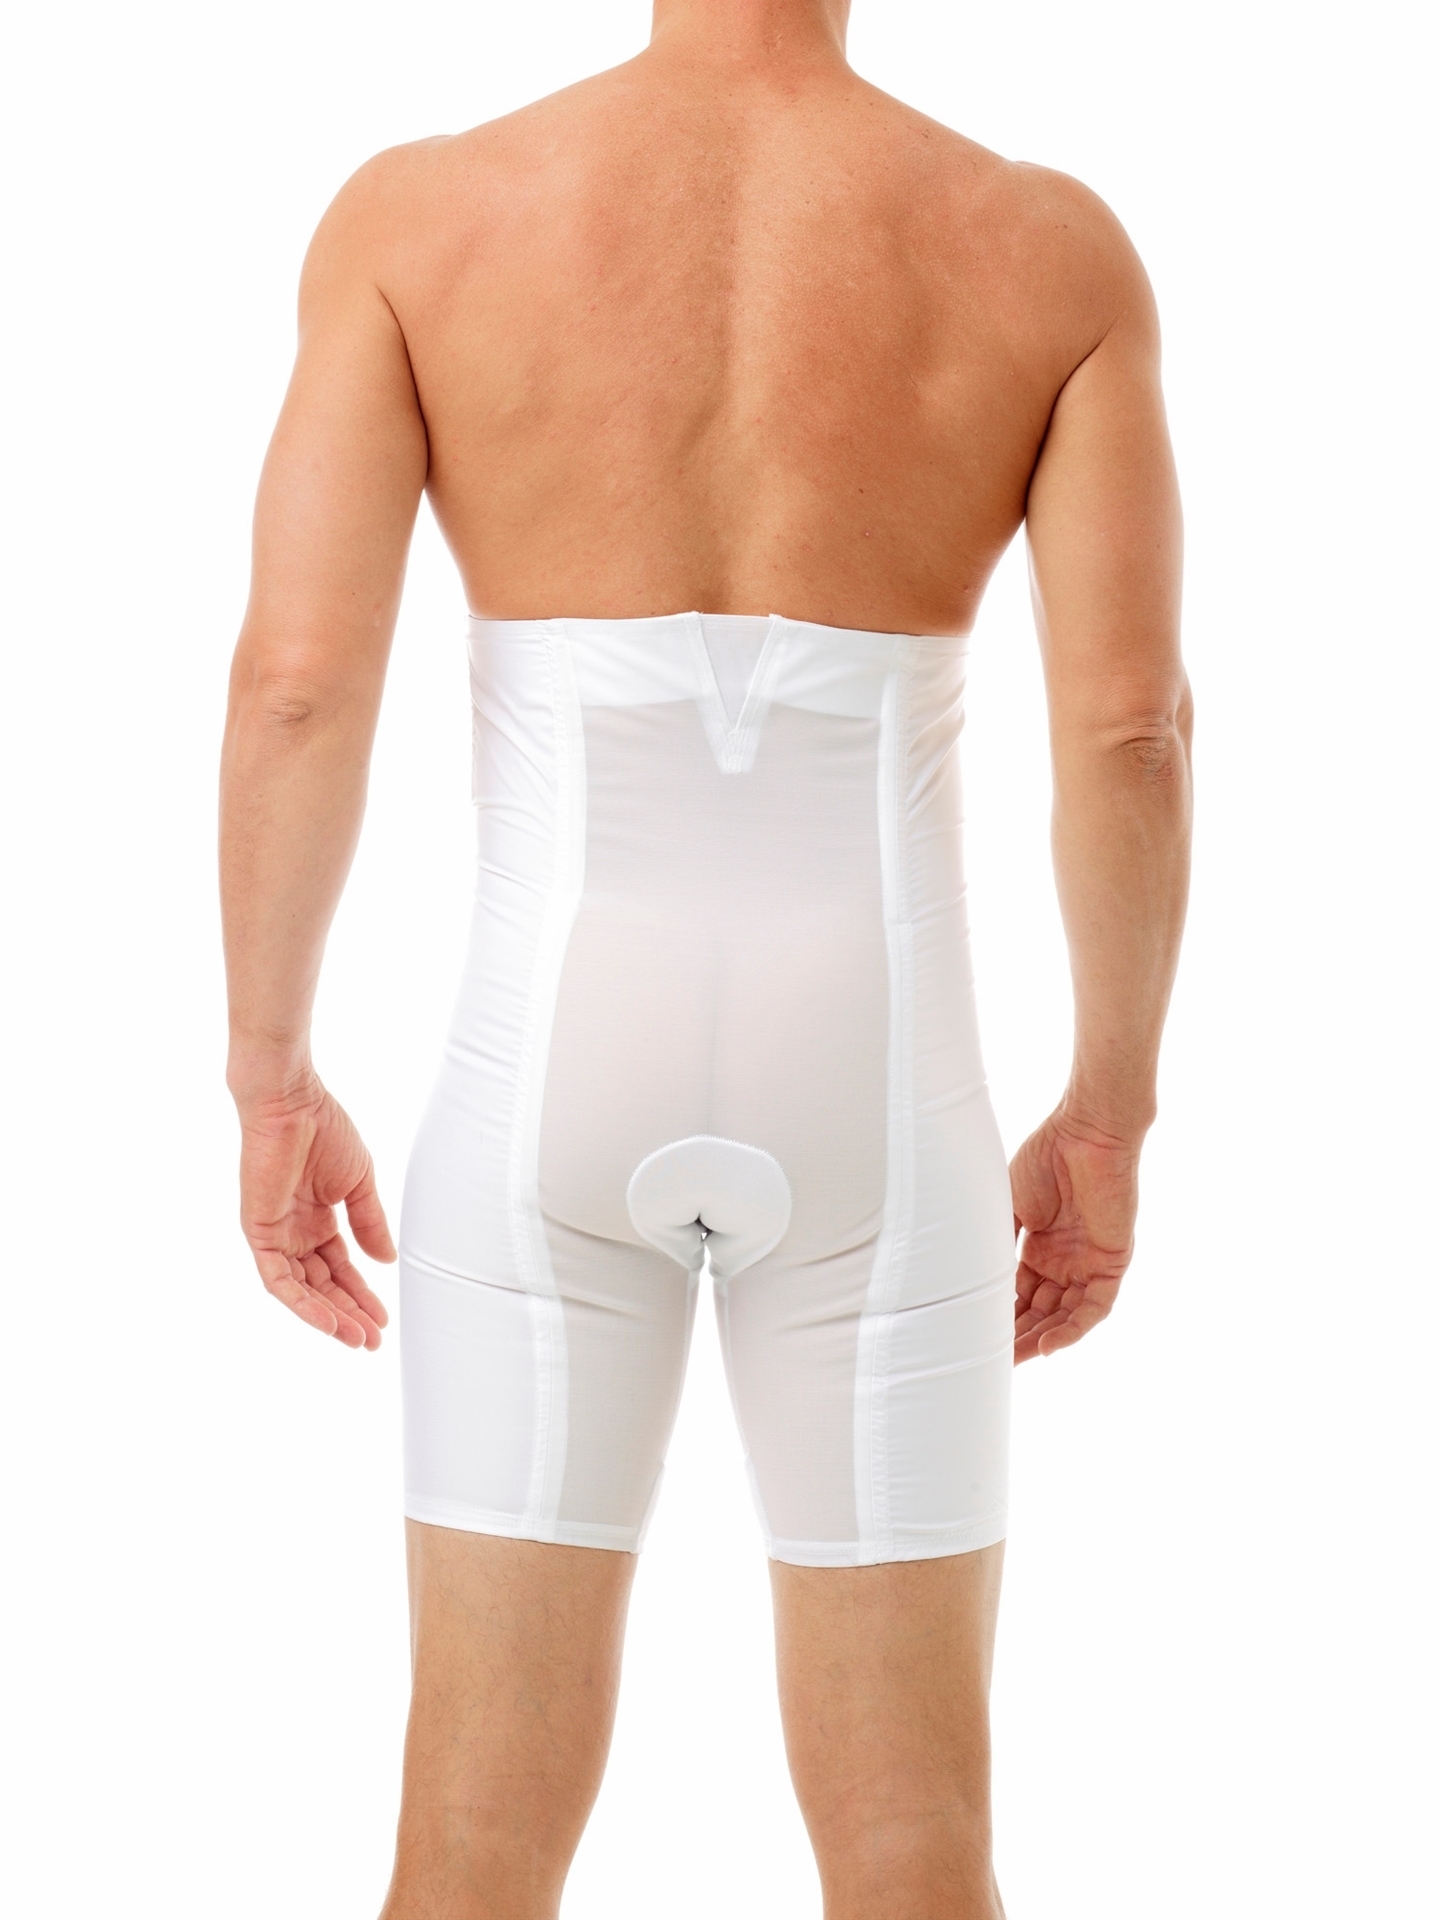 The £15 'Mansie' Spanx style control suit for men which promises